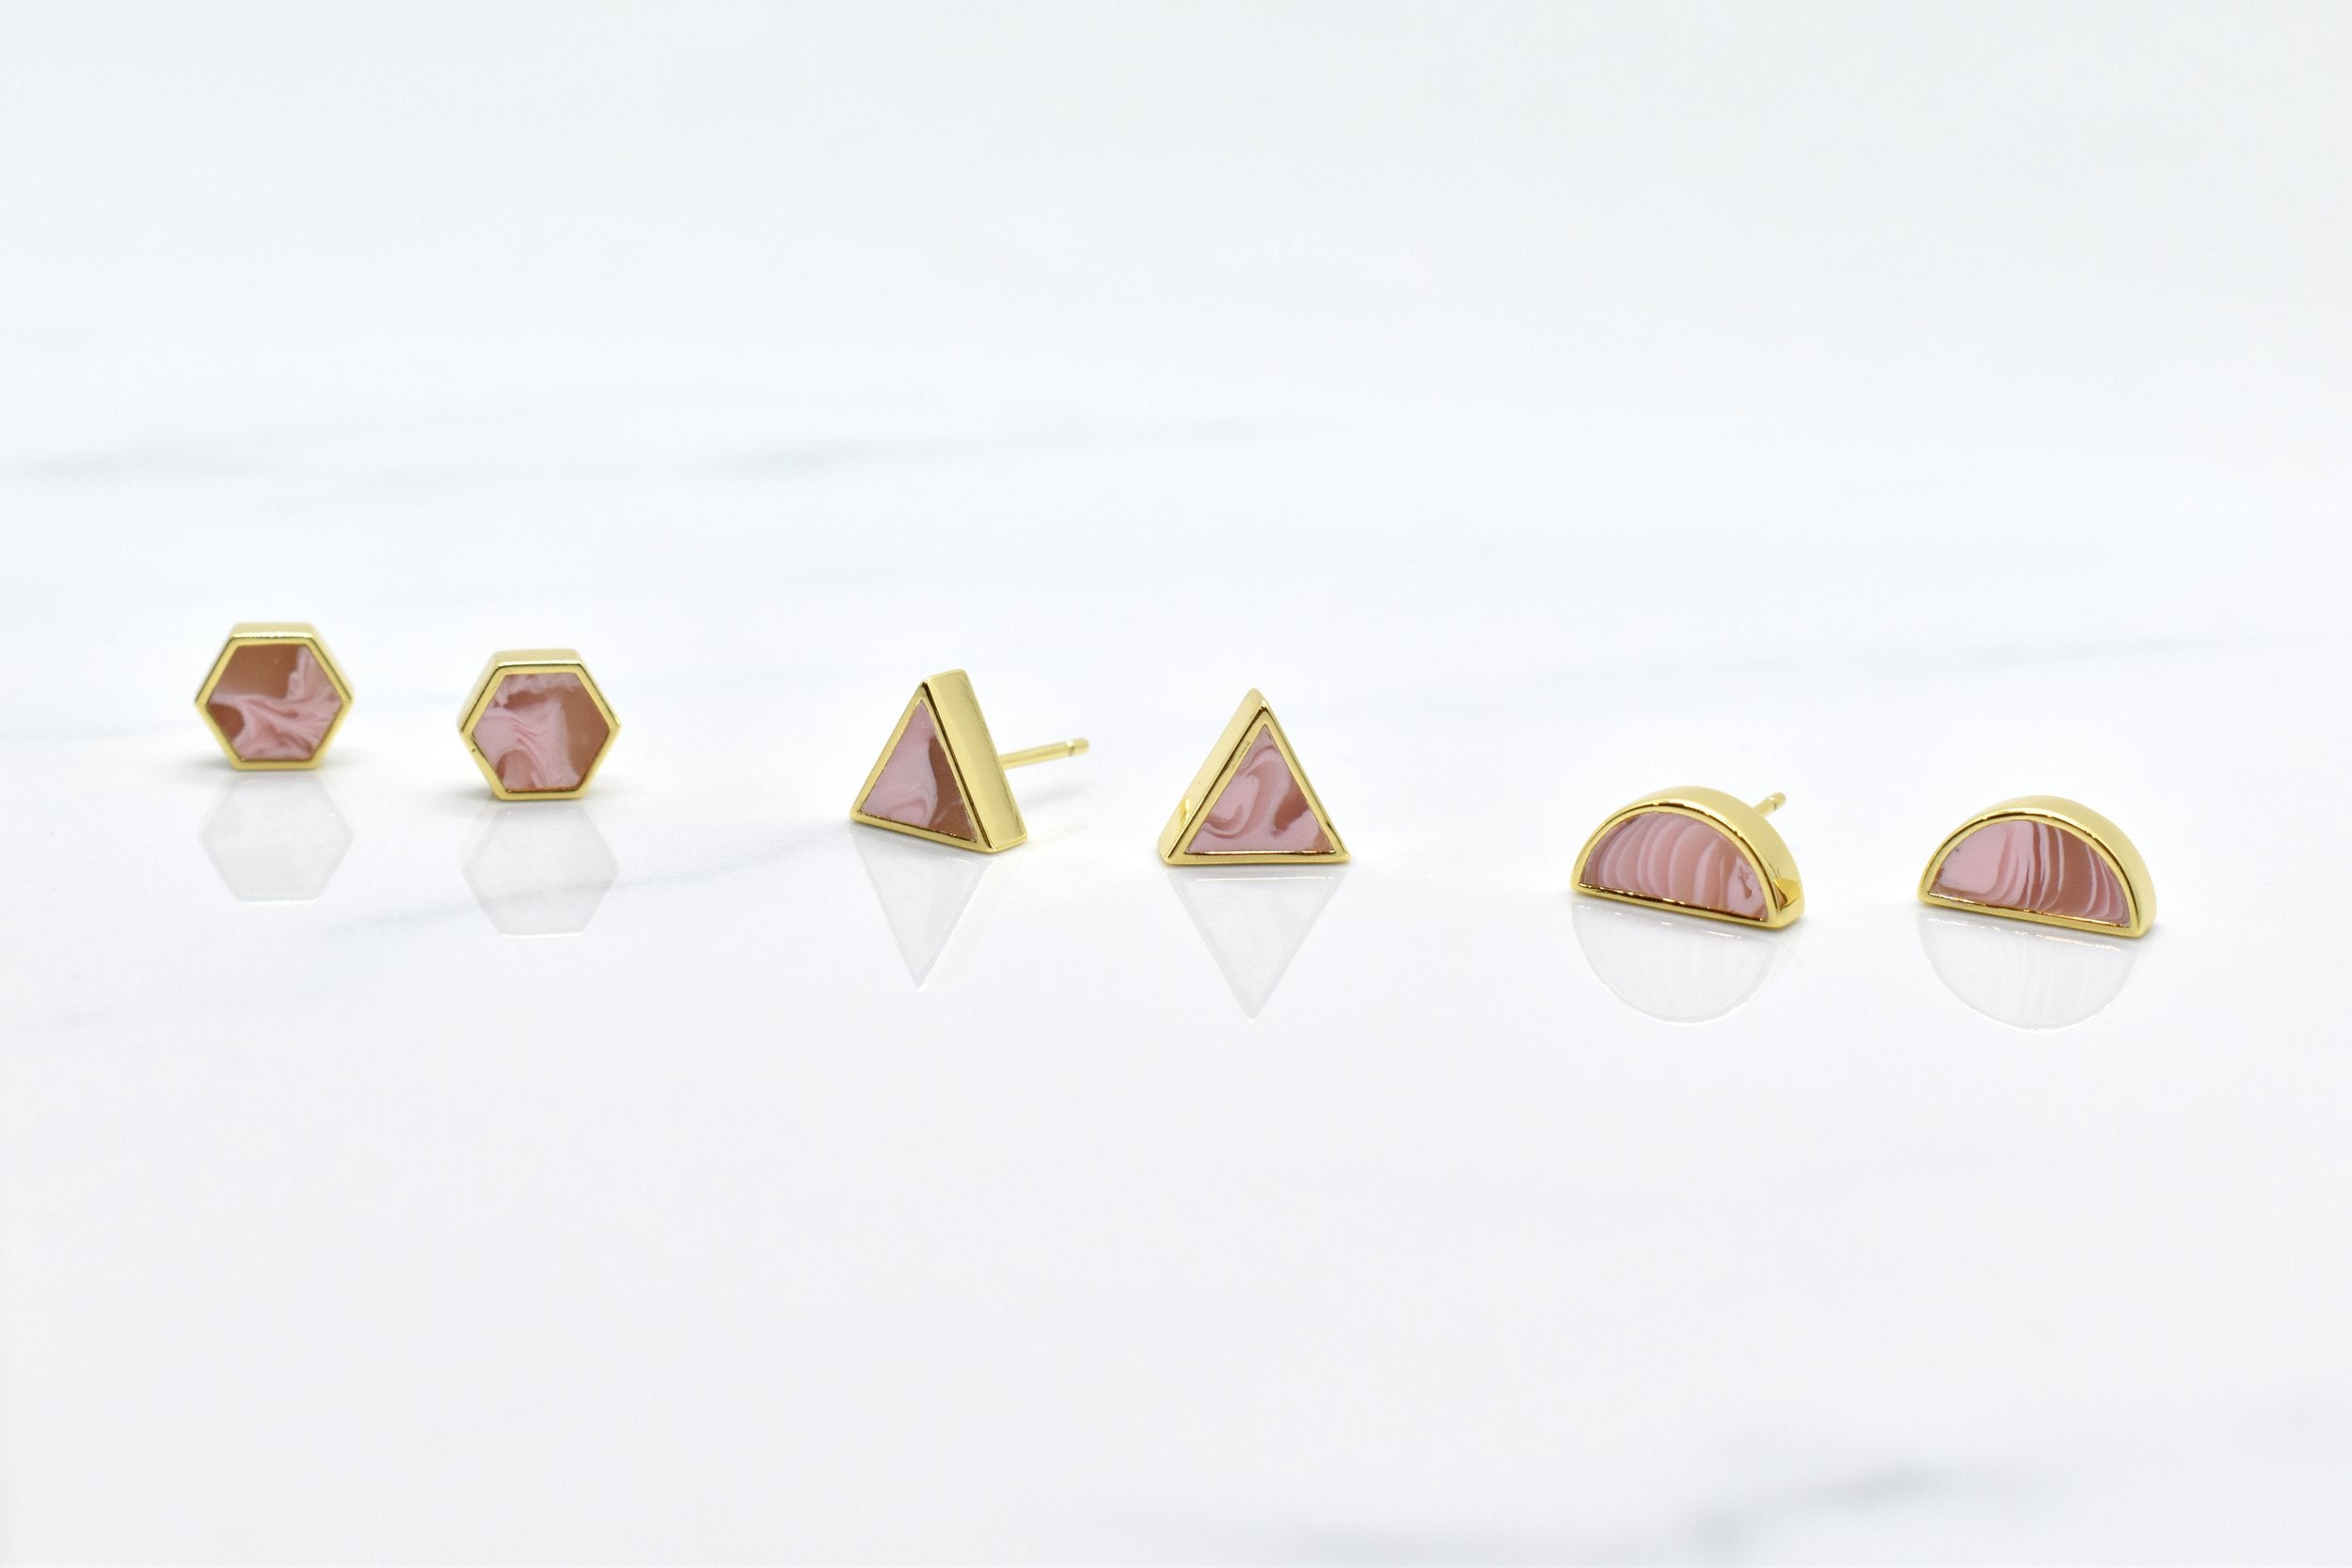 set of three geometric earrings in candy pink swirls in hexagon, triangle, and half moon shapes with gold accents and studs.